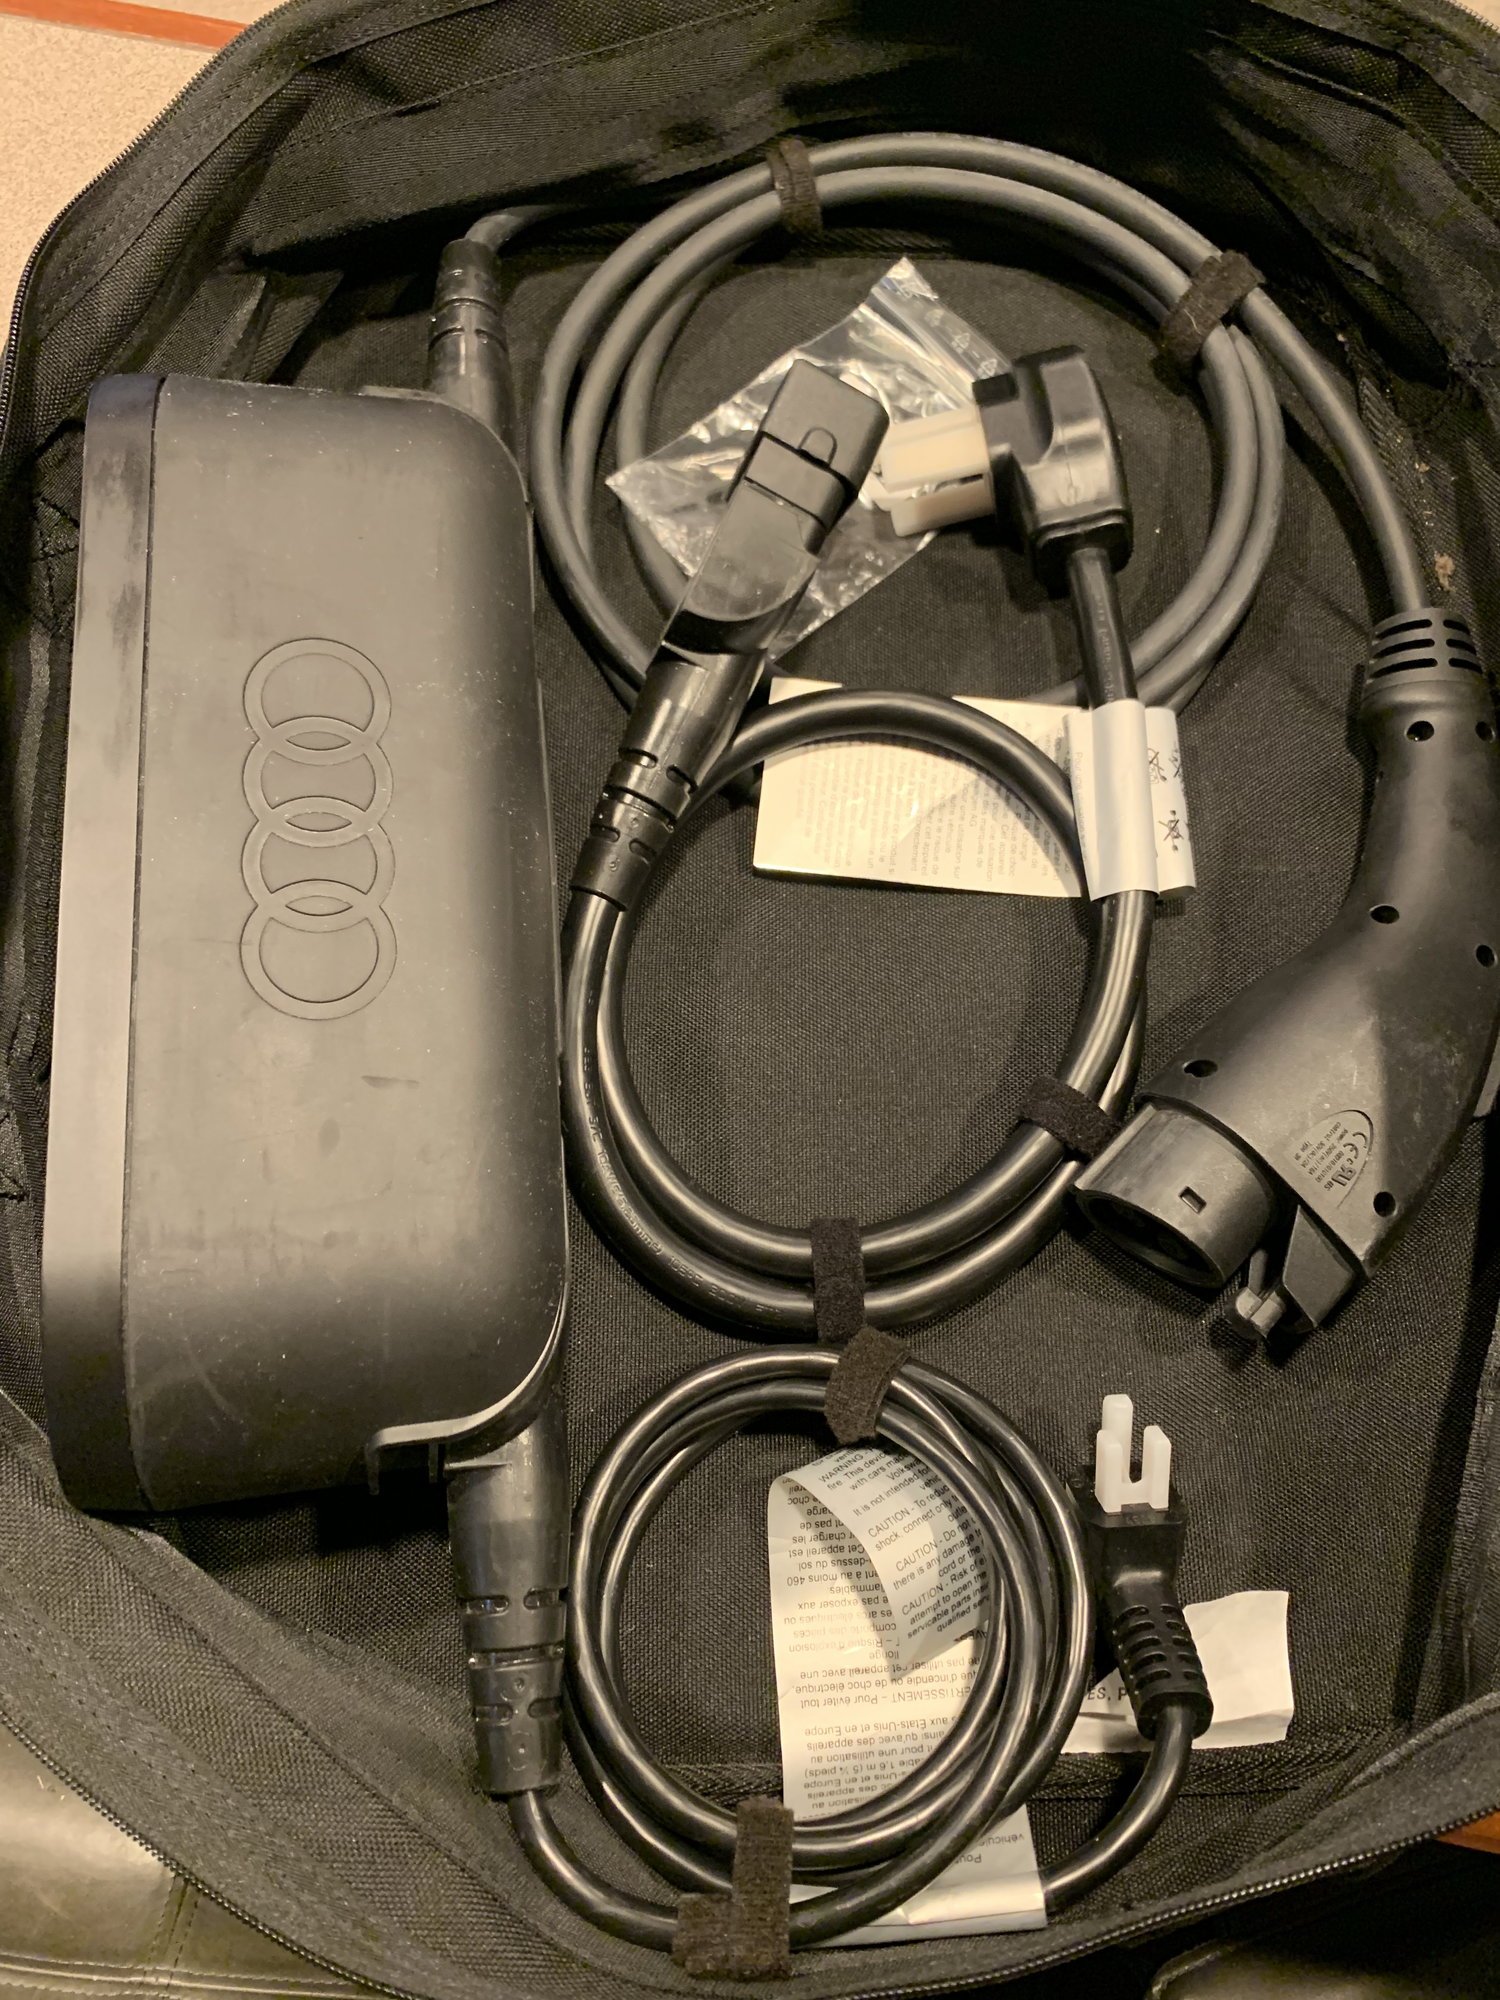 Audio Video/Electronics - Genuine AUDI A3 E-TRON Portable Charger 120V W/ Case And Both Charging Cables - Used - 2018 Audi A3 Sportback e-tron - Golden, CO 80401, United States